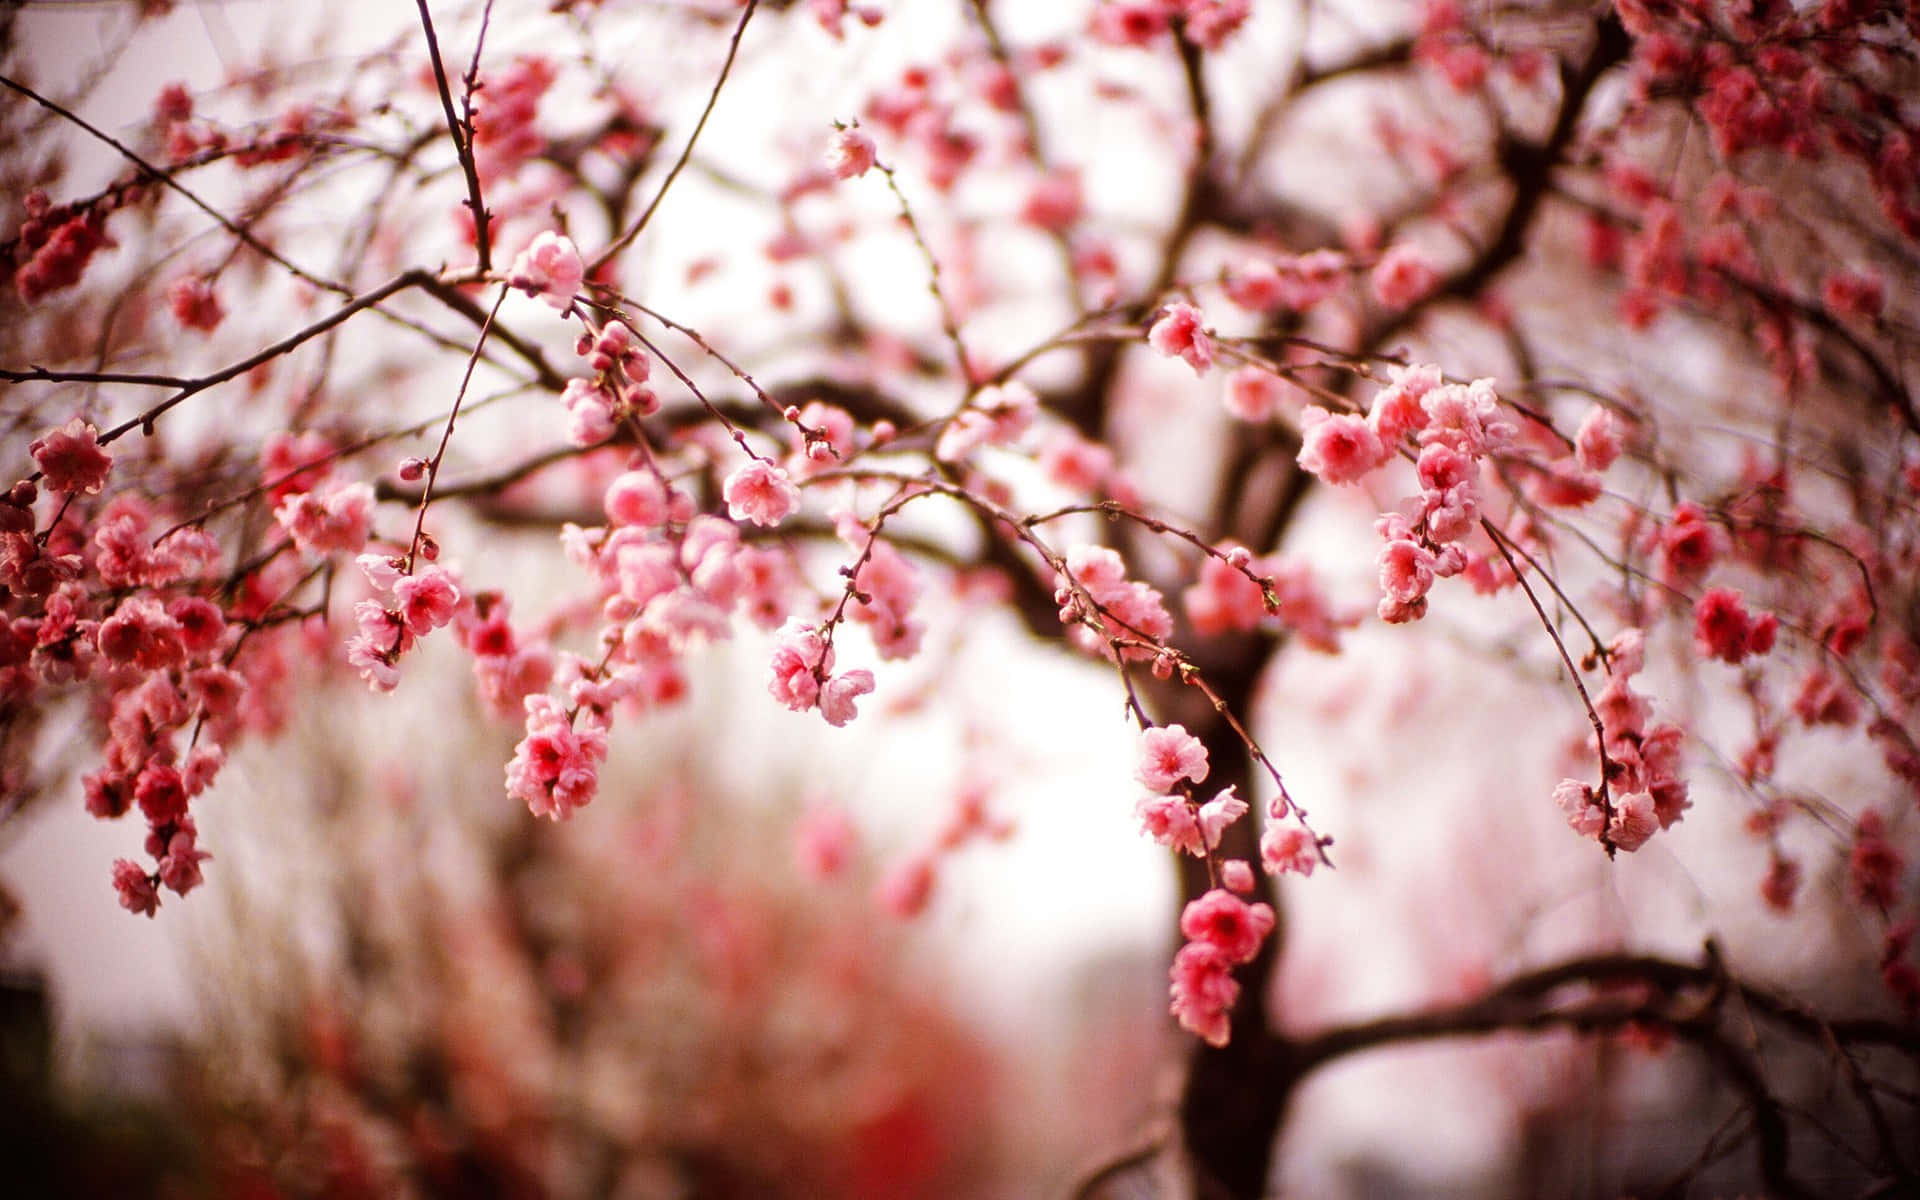 Celebrating the beauty of spring with a stunning sakura tree